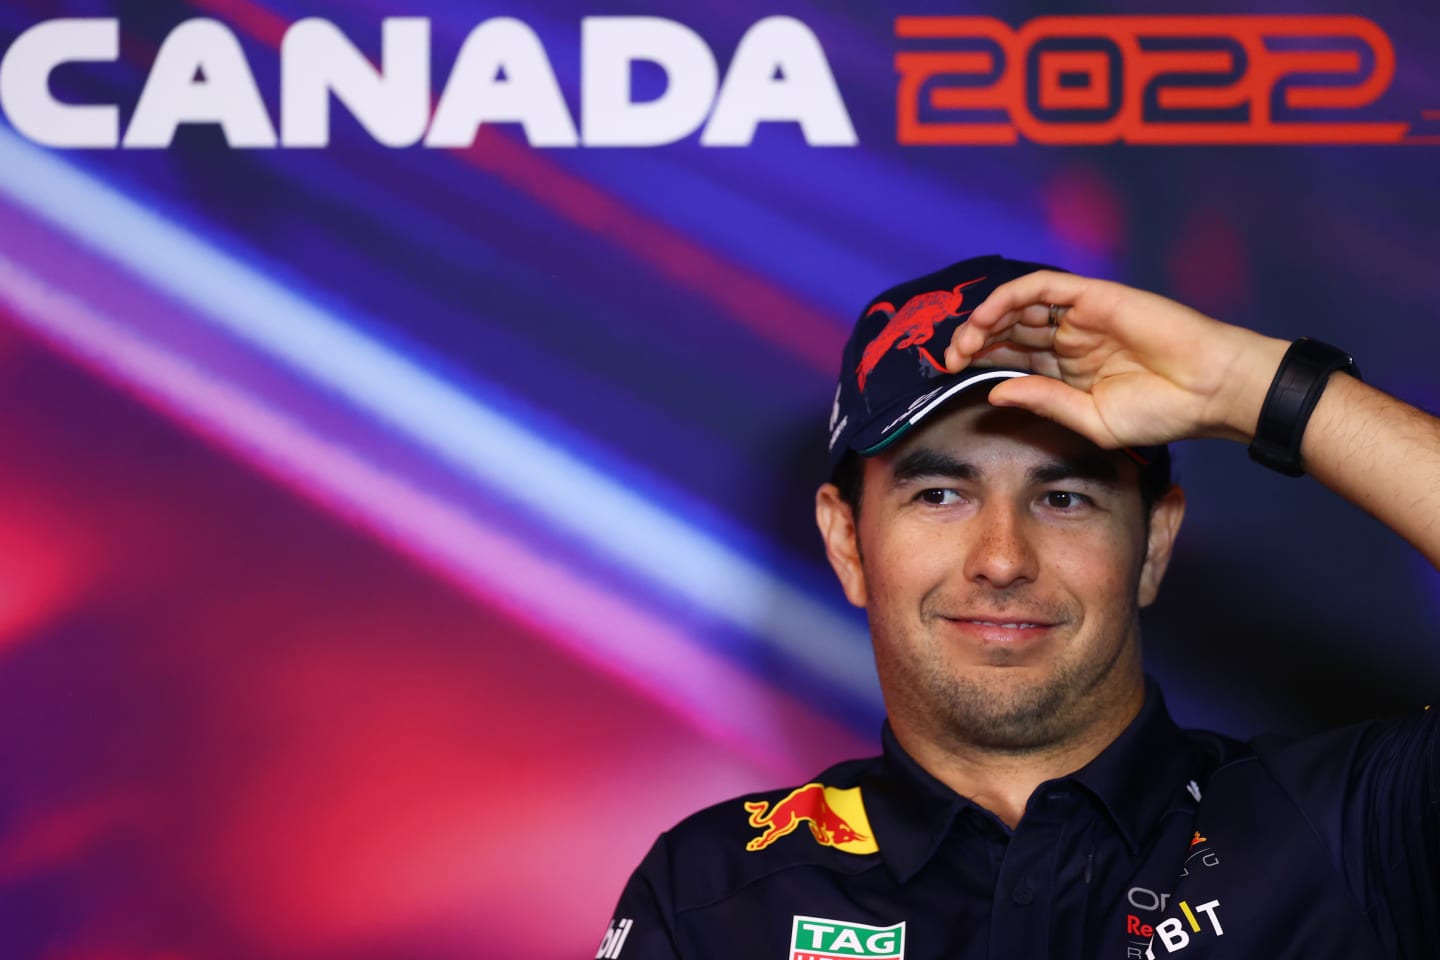 MONTREAL, QUEBEC - JUNE 17: Sergio Perez of Mexico and Oracle Red Bull Racing looks on in the Drivers Press Conference prior to practice ahead of the F1 Grand Prix of Canada at Circuit Gilles Villeneuve on June 17, 2022 in Montreal, Quebec. (Photo by Dan Istitene/Getty Images)